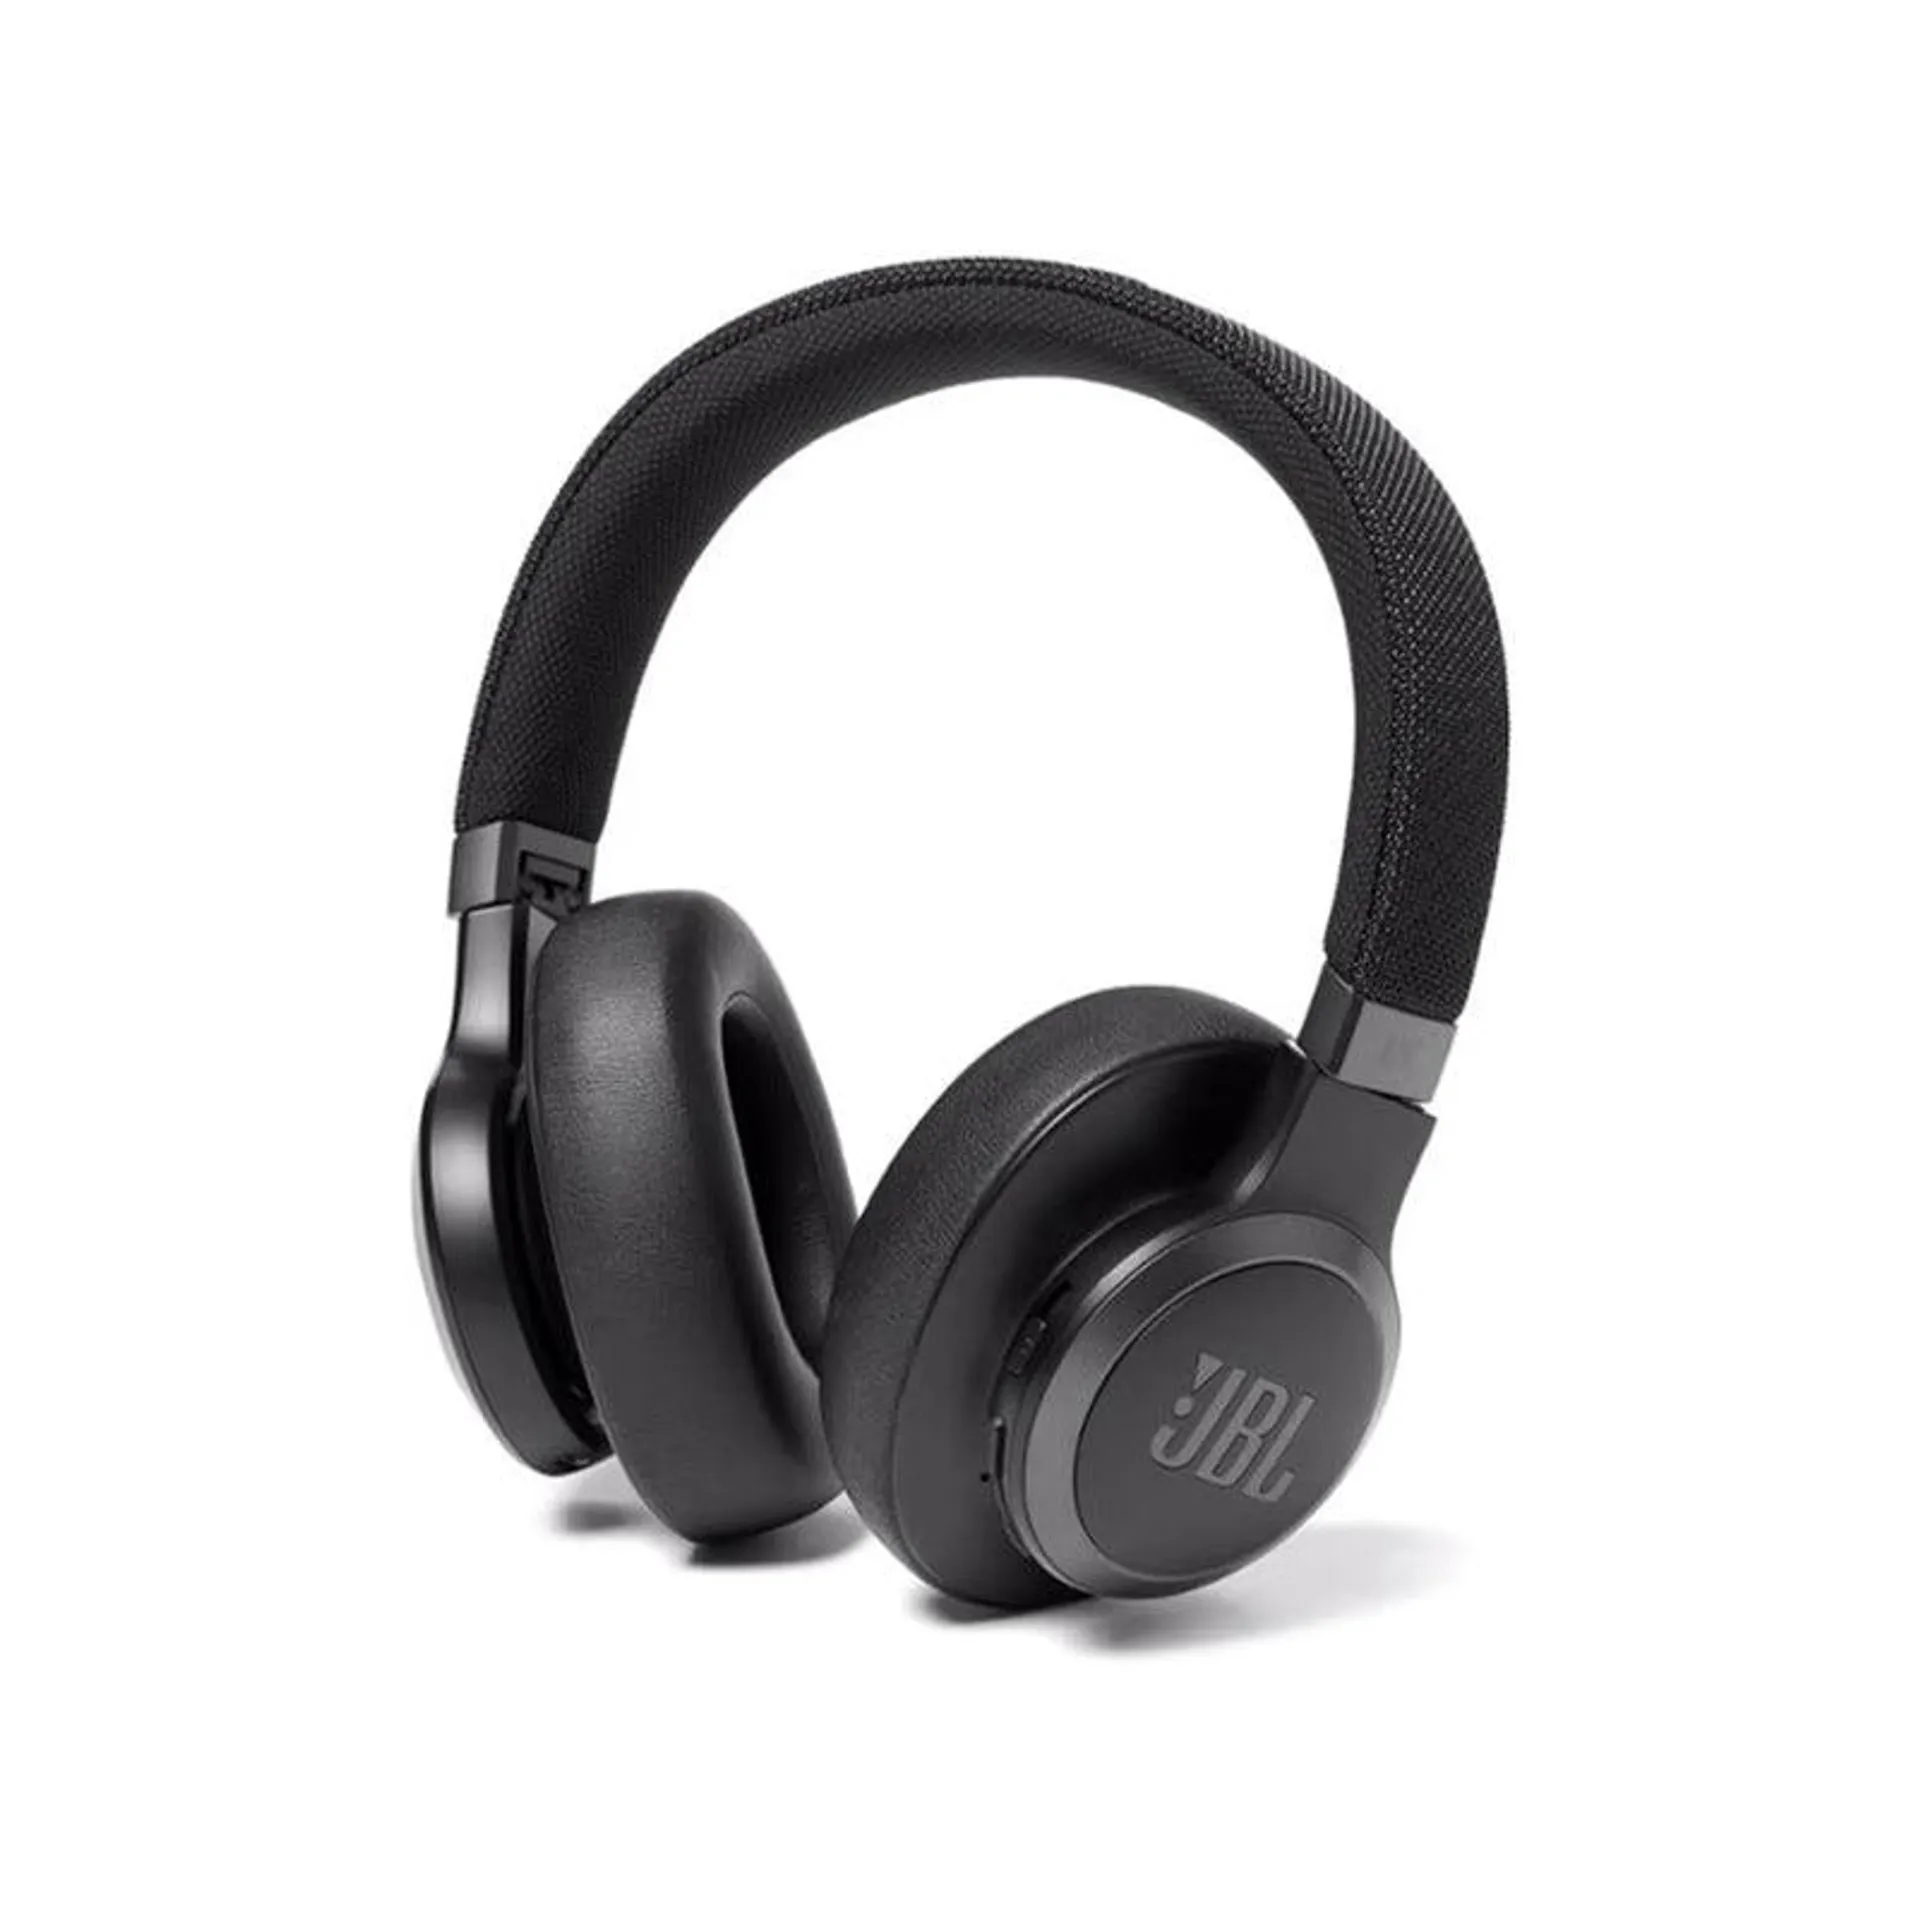 LIVE 660NC, Wireless Over-Ear Noise-Cancelling Headphones with Mic, Black